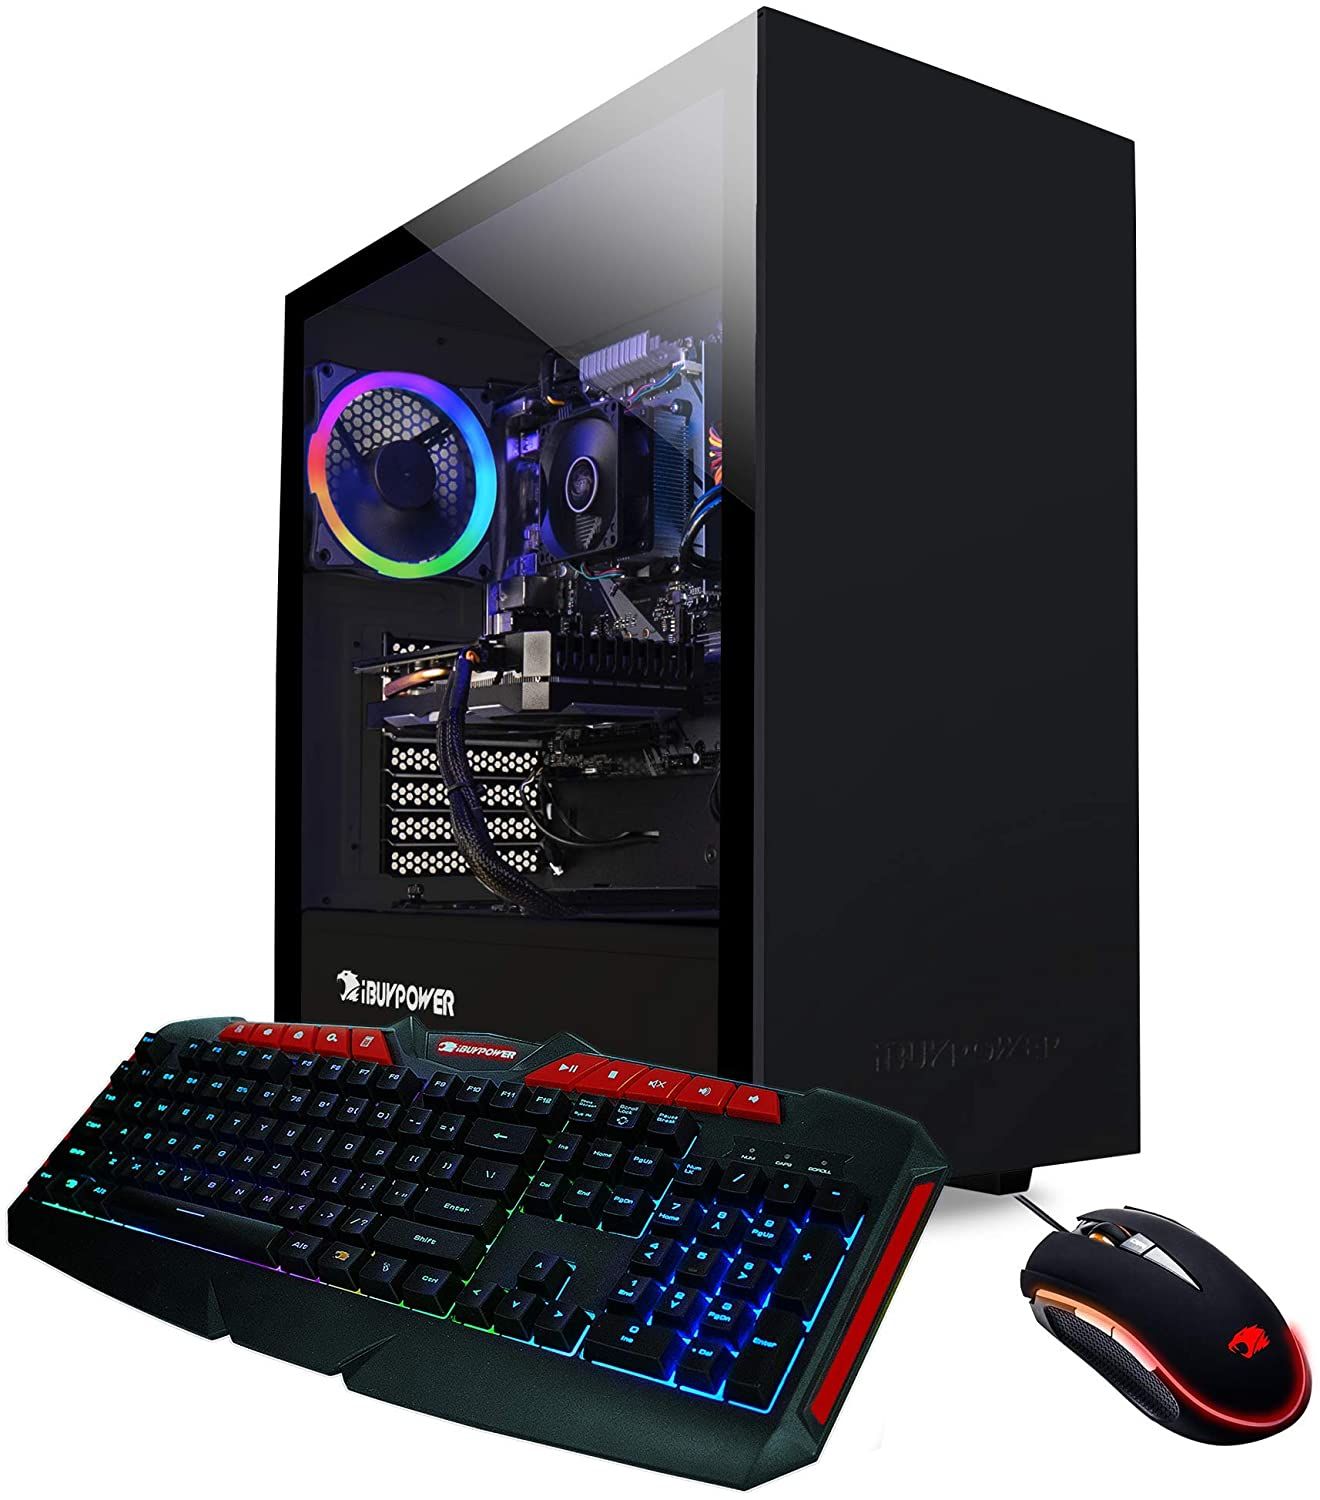 iBUYPOWER Enthusiast Gaming PC a